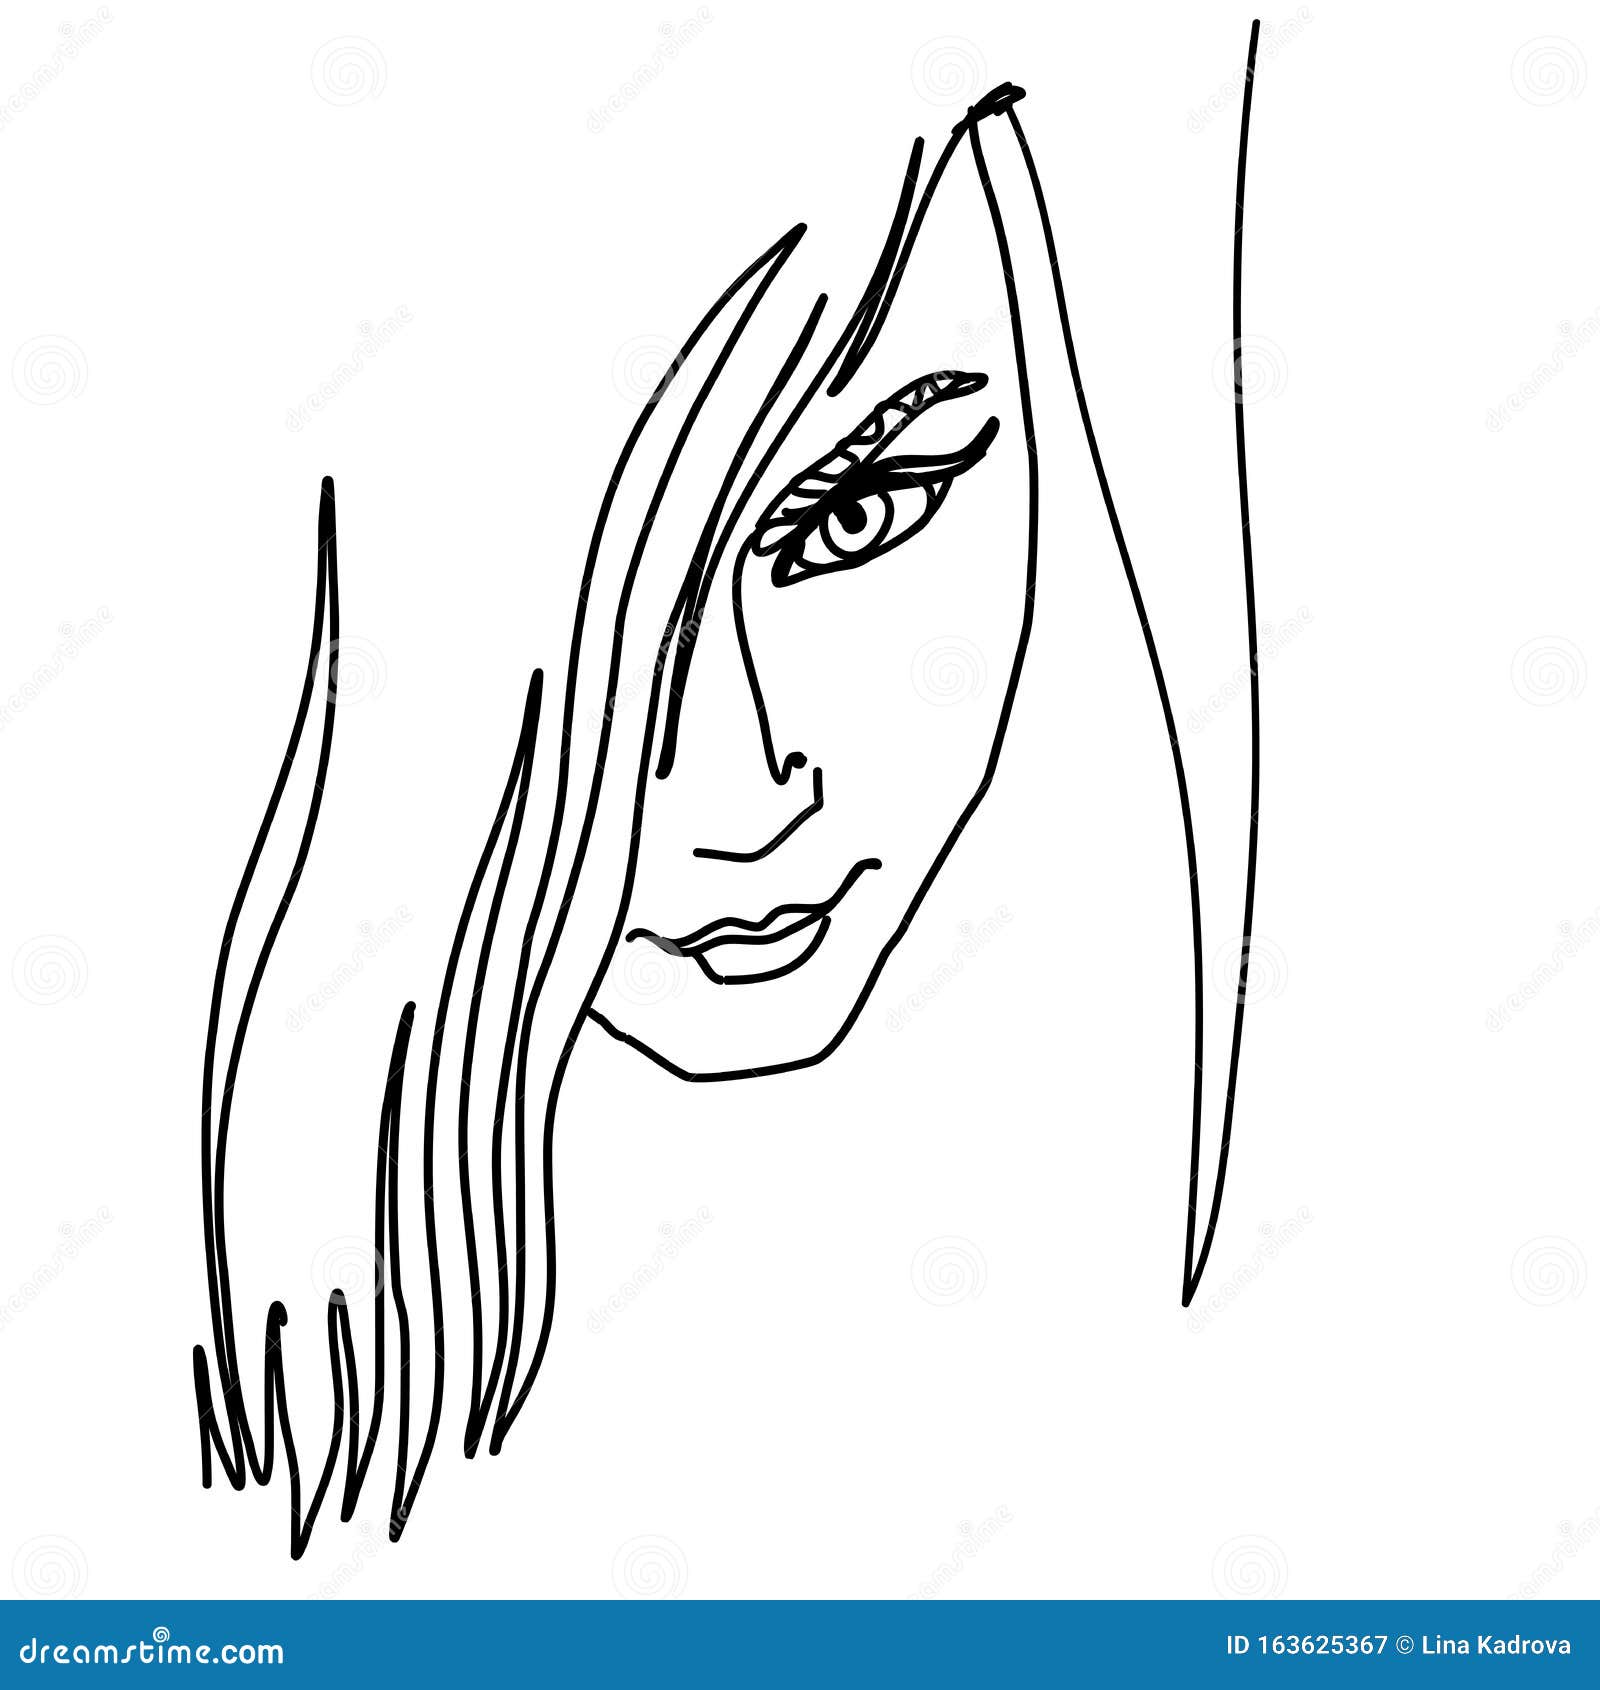 Continuous Line Drawing. Abstract Portrait Of A Woman Up